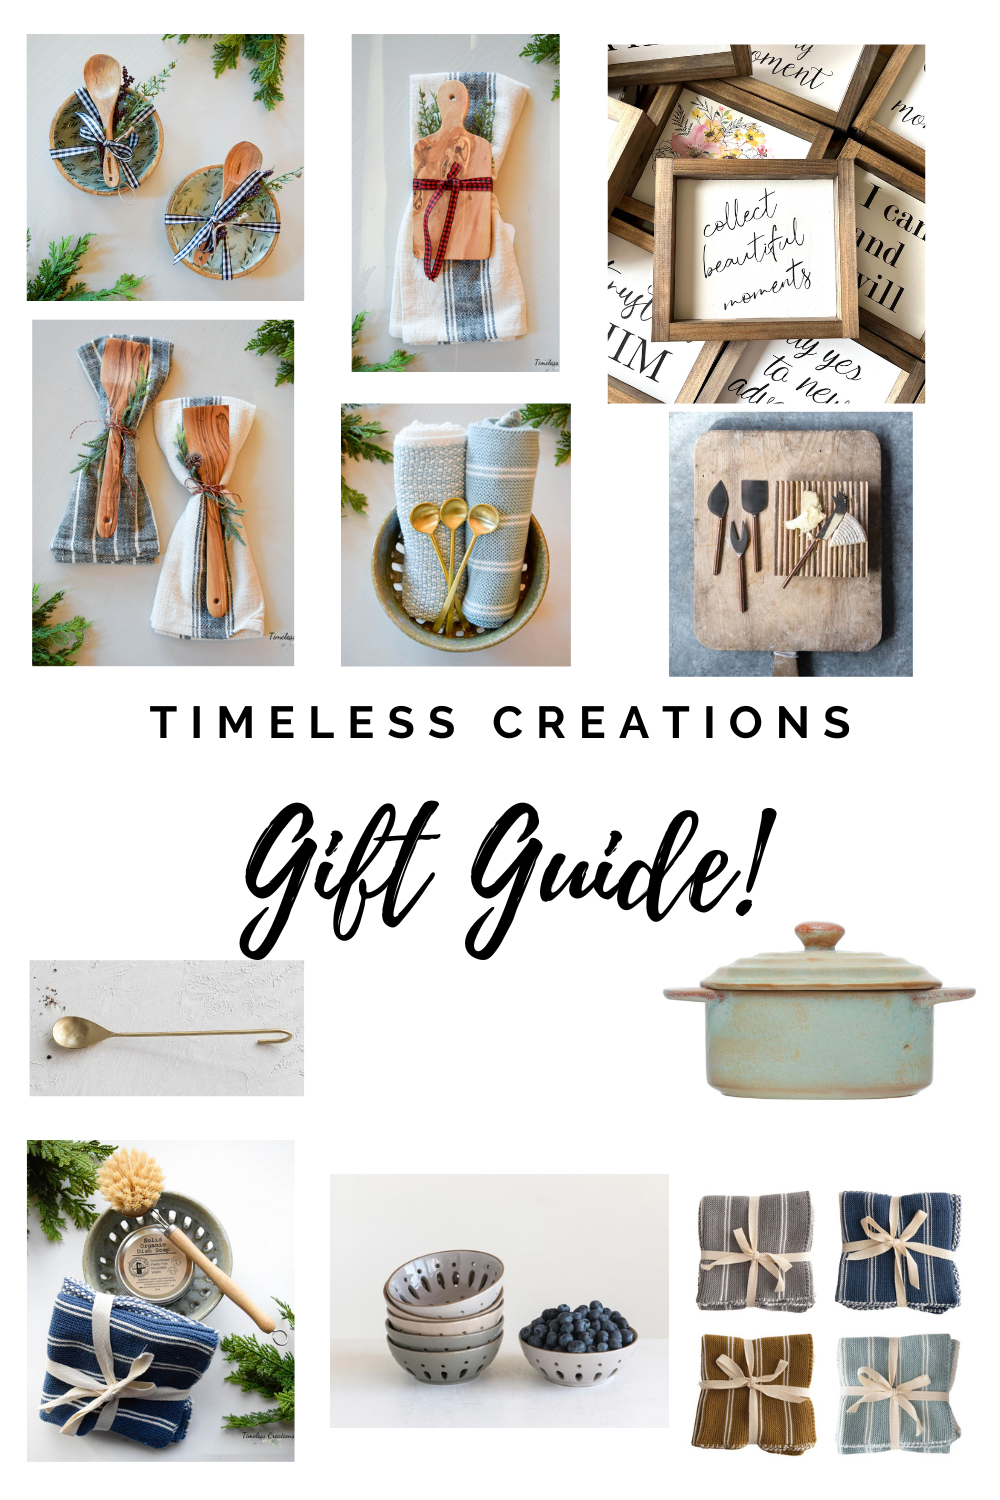 Great Gift Ideas from Timeless Creations - Timeless Creations